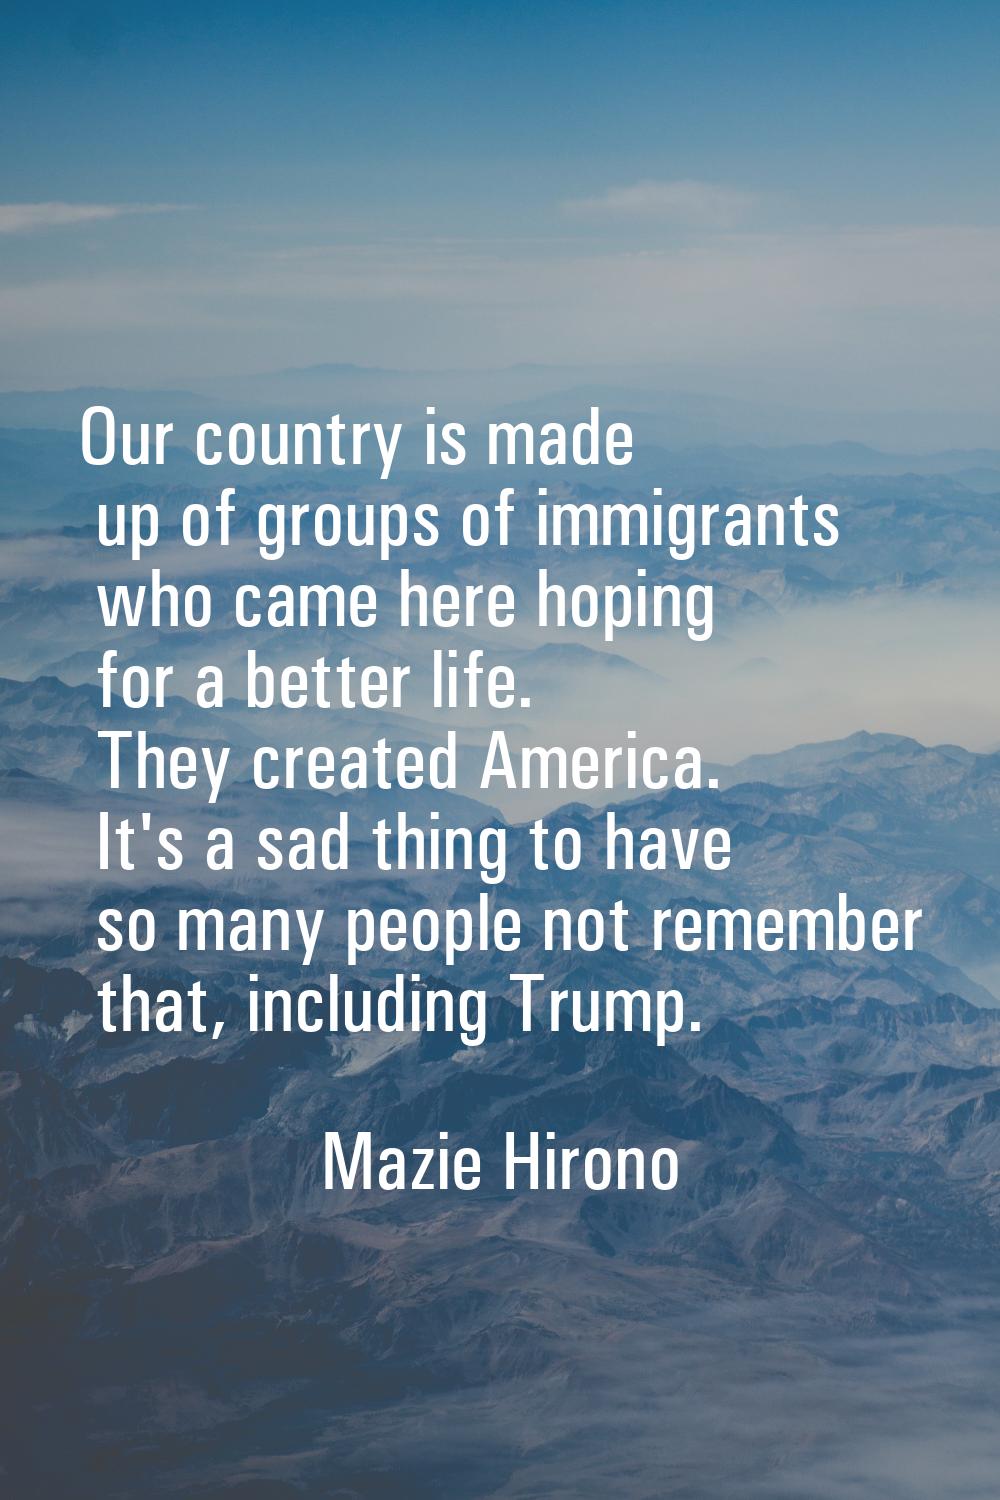 Our country is made up of groups of immigrants who came here hoping for a better life. They created